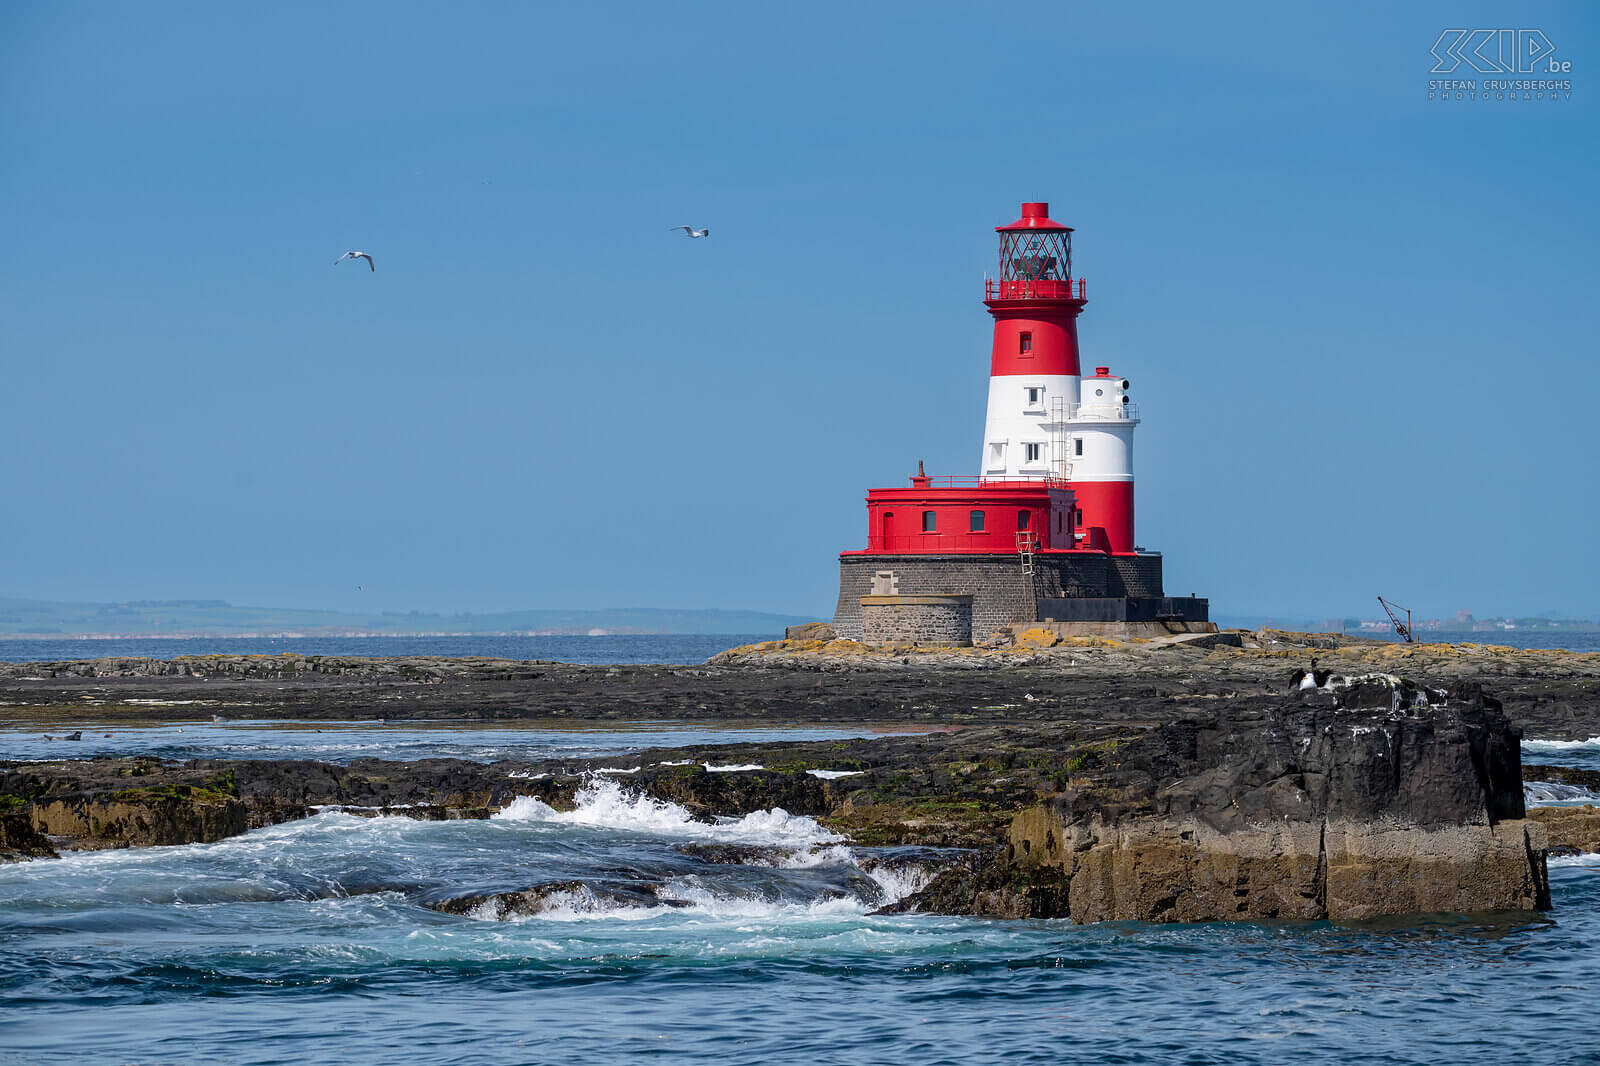 Farne Islands - Longstone lighthouse On Longstone Island there is a still working and characteristic red and white lighthouse that was built in 1826. Stefan Cruysberghs